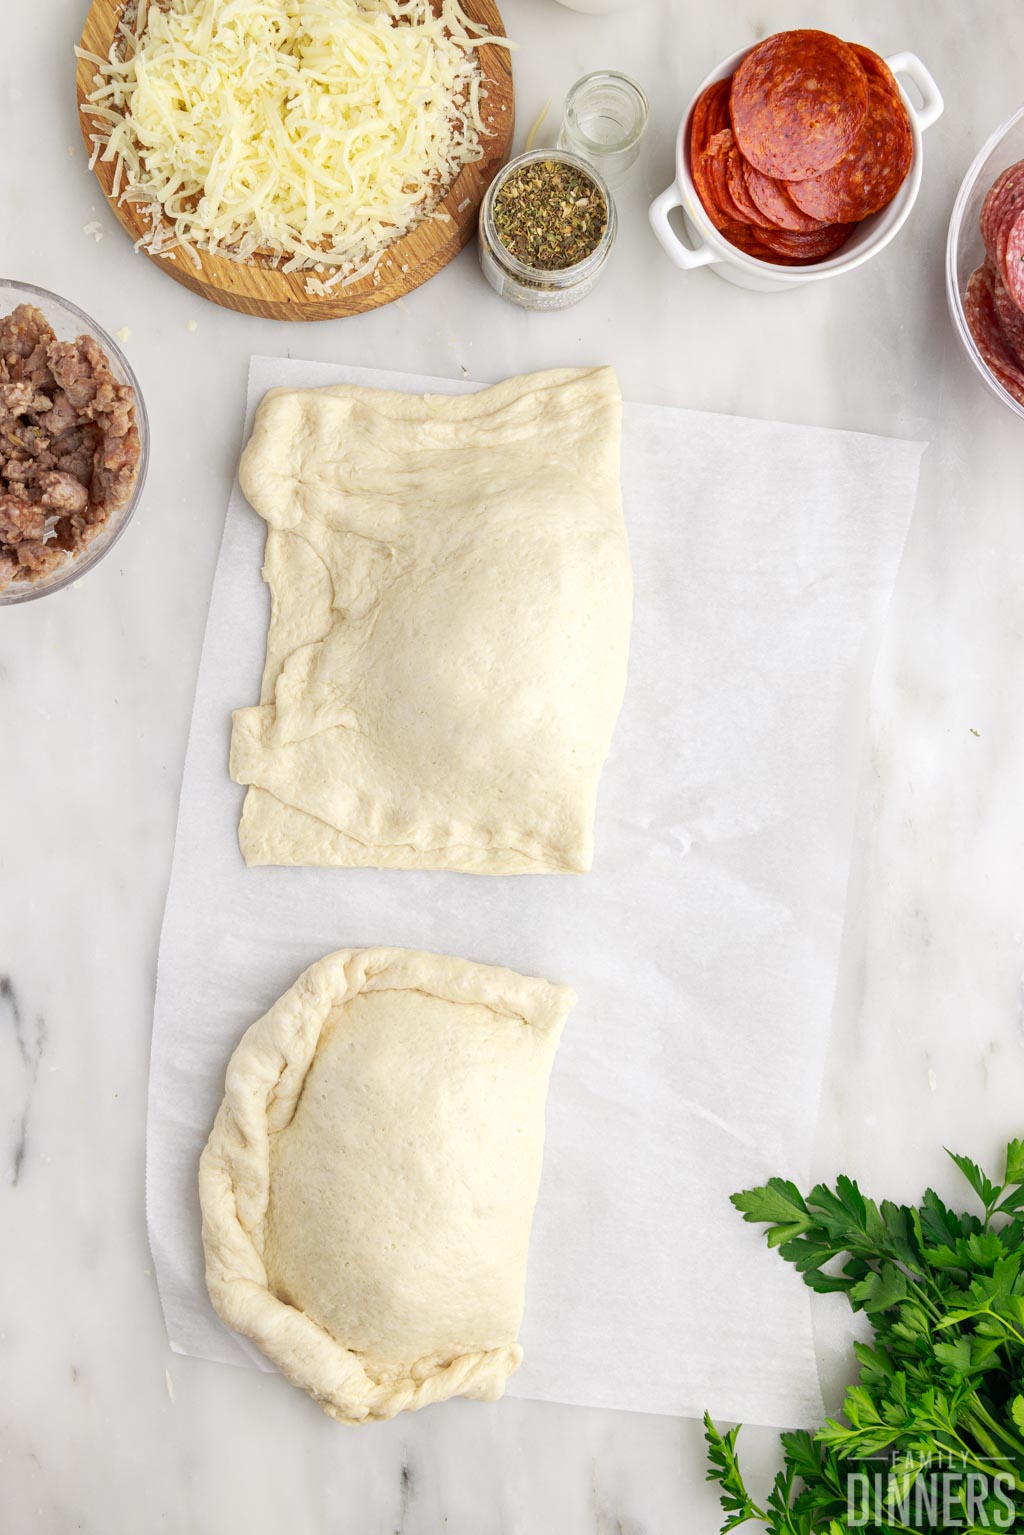 Calzone dough with filling folded over and pinched into pockets.